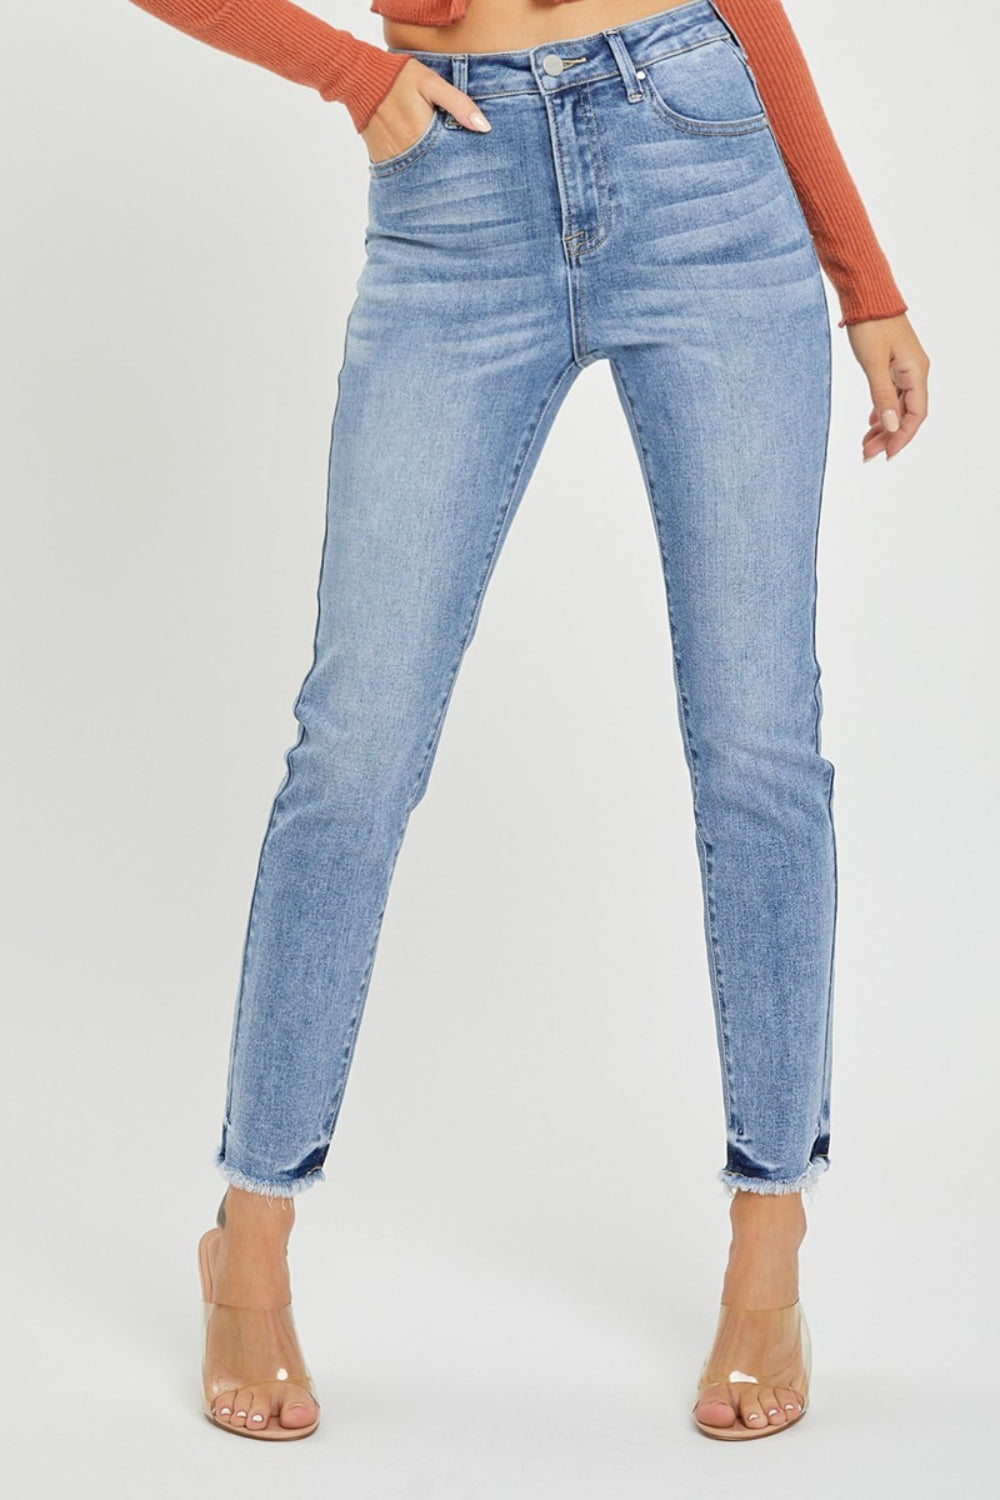 These high rise frayed hem skinny jeans are a trendy and versatile addition to your closet. The high rise design helps create a flattering silhouette and provides extra coverage. The frayed hem adds a touch of edge and style to the classic skinny jeans.  0-3X